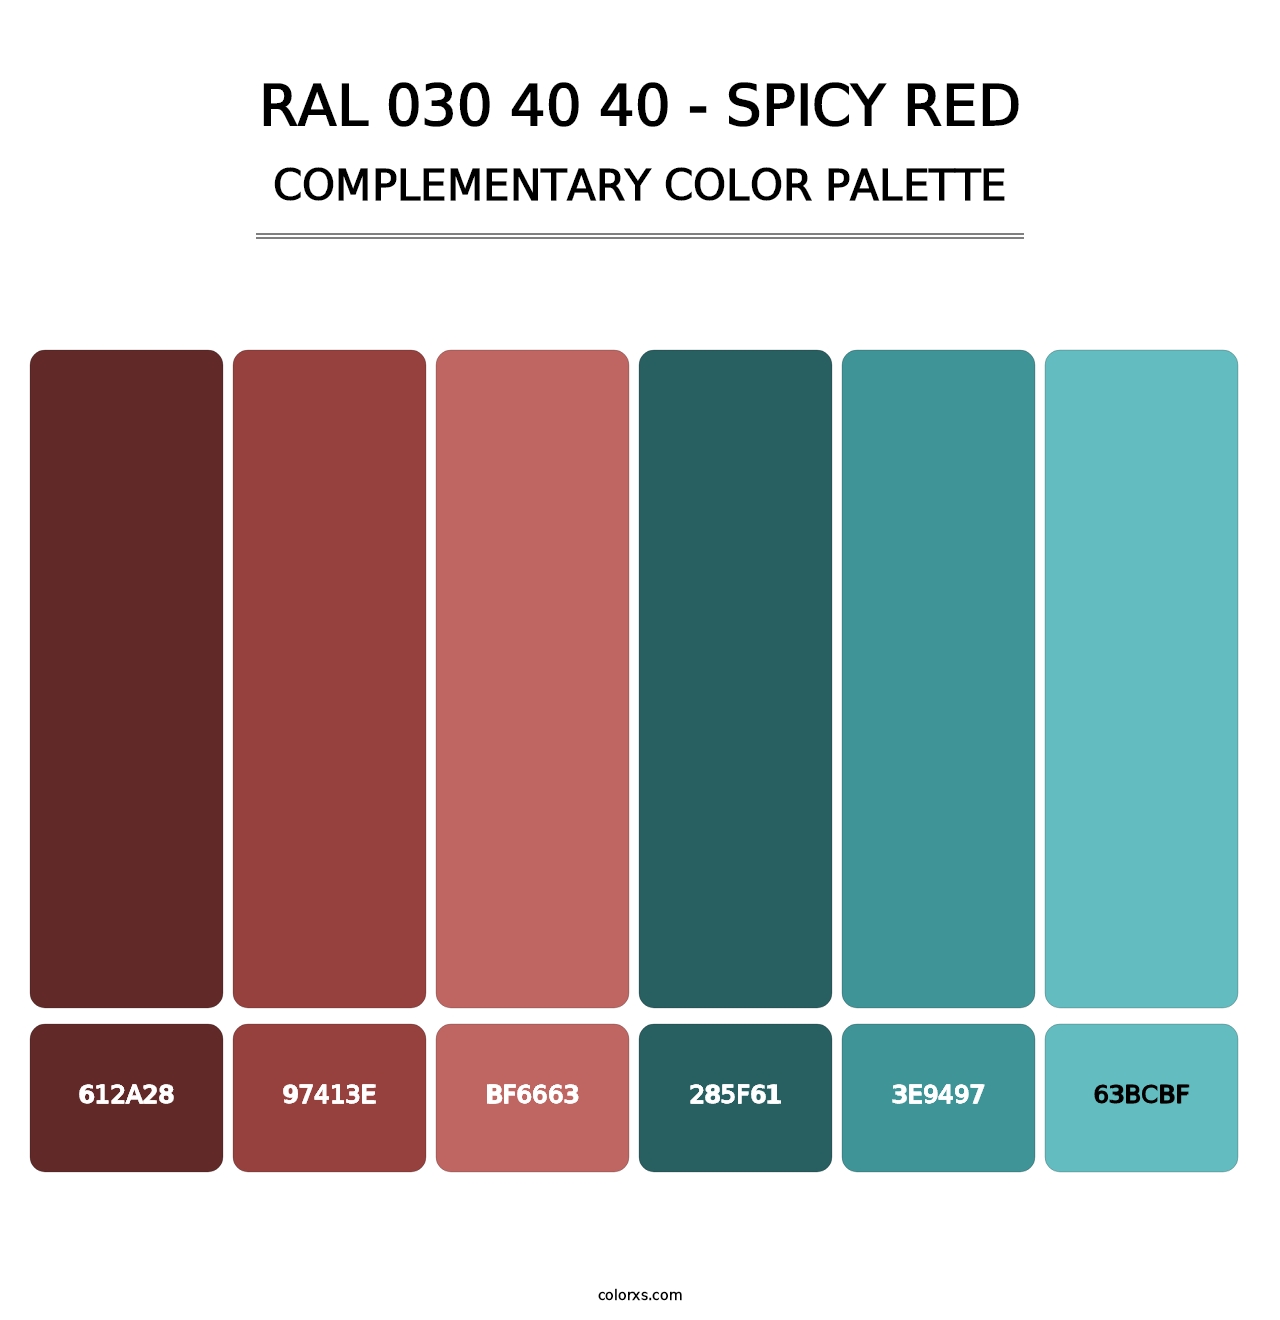 RAL 030 40 40 - Spicy Red - Complementary Color Palette